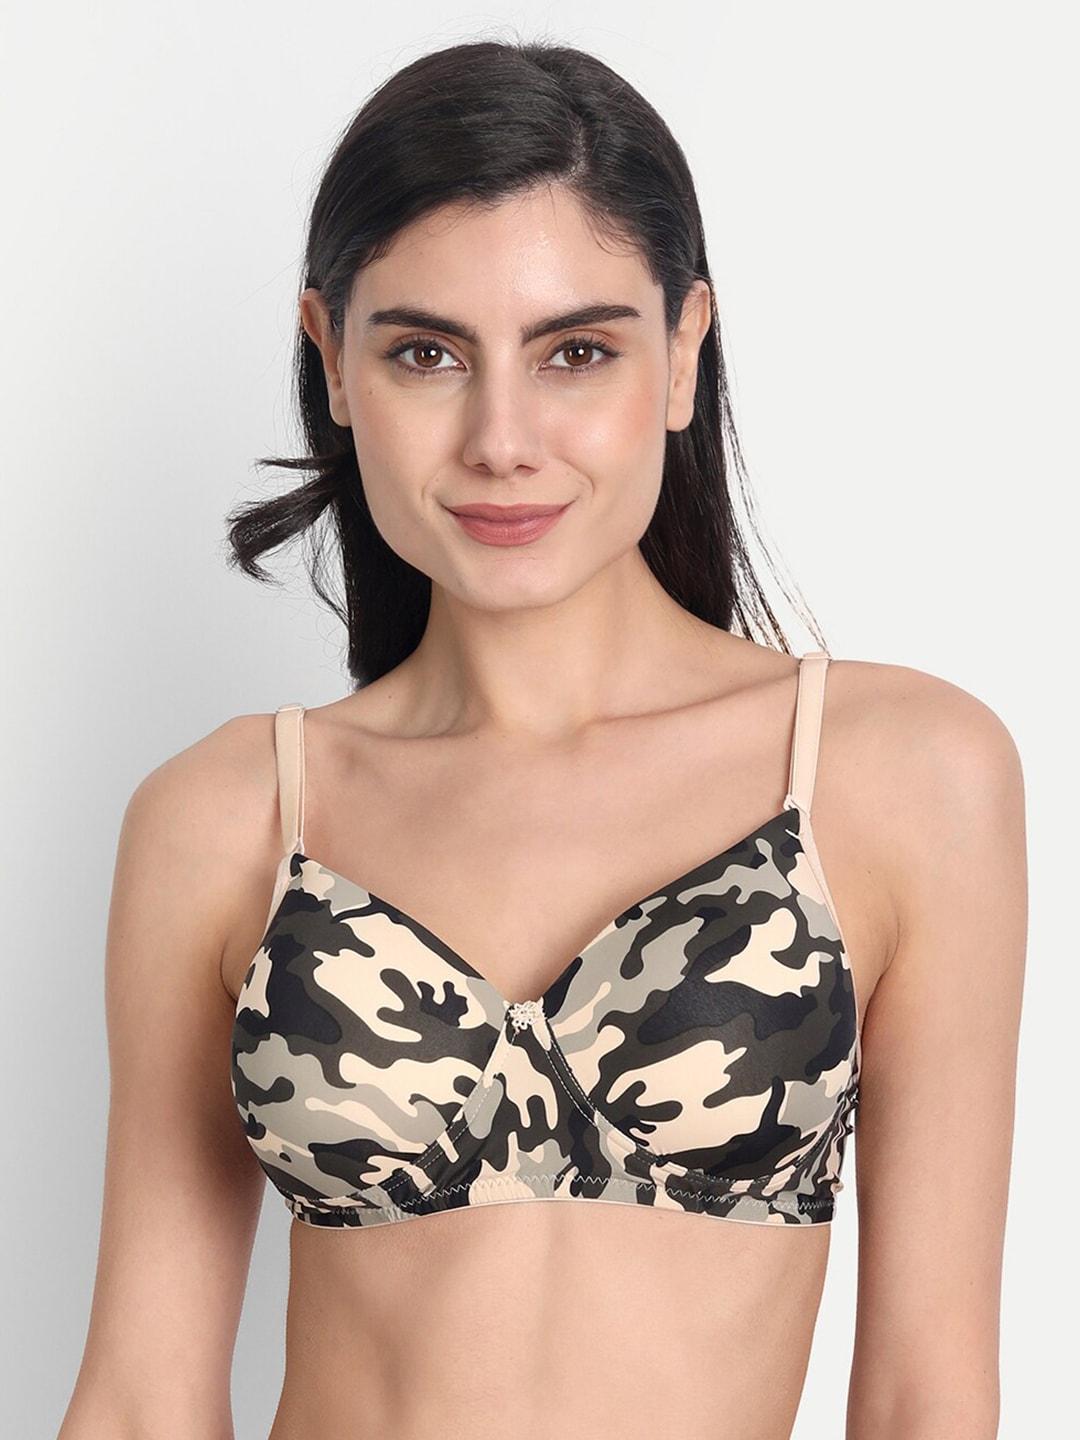 aimly-abstract-printed-full-coverage-seamless-heavily-padded-non-wired-dry-fit-push-up-bra